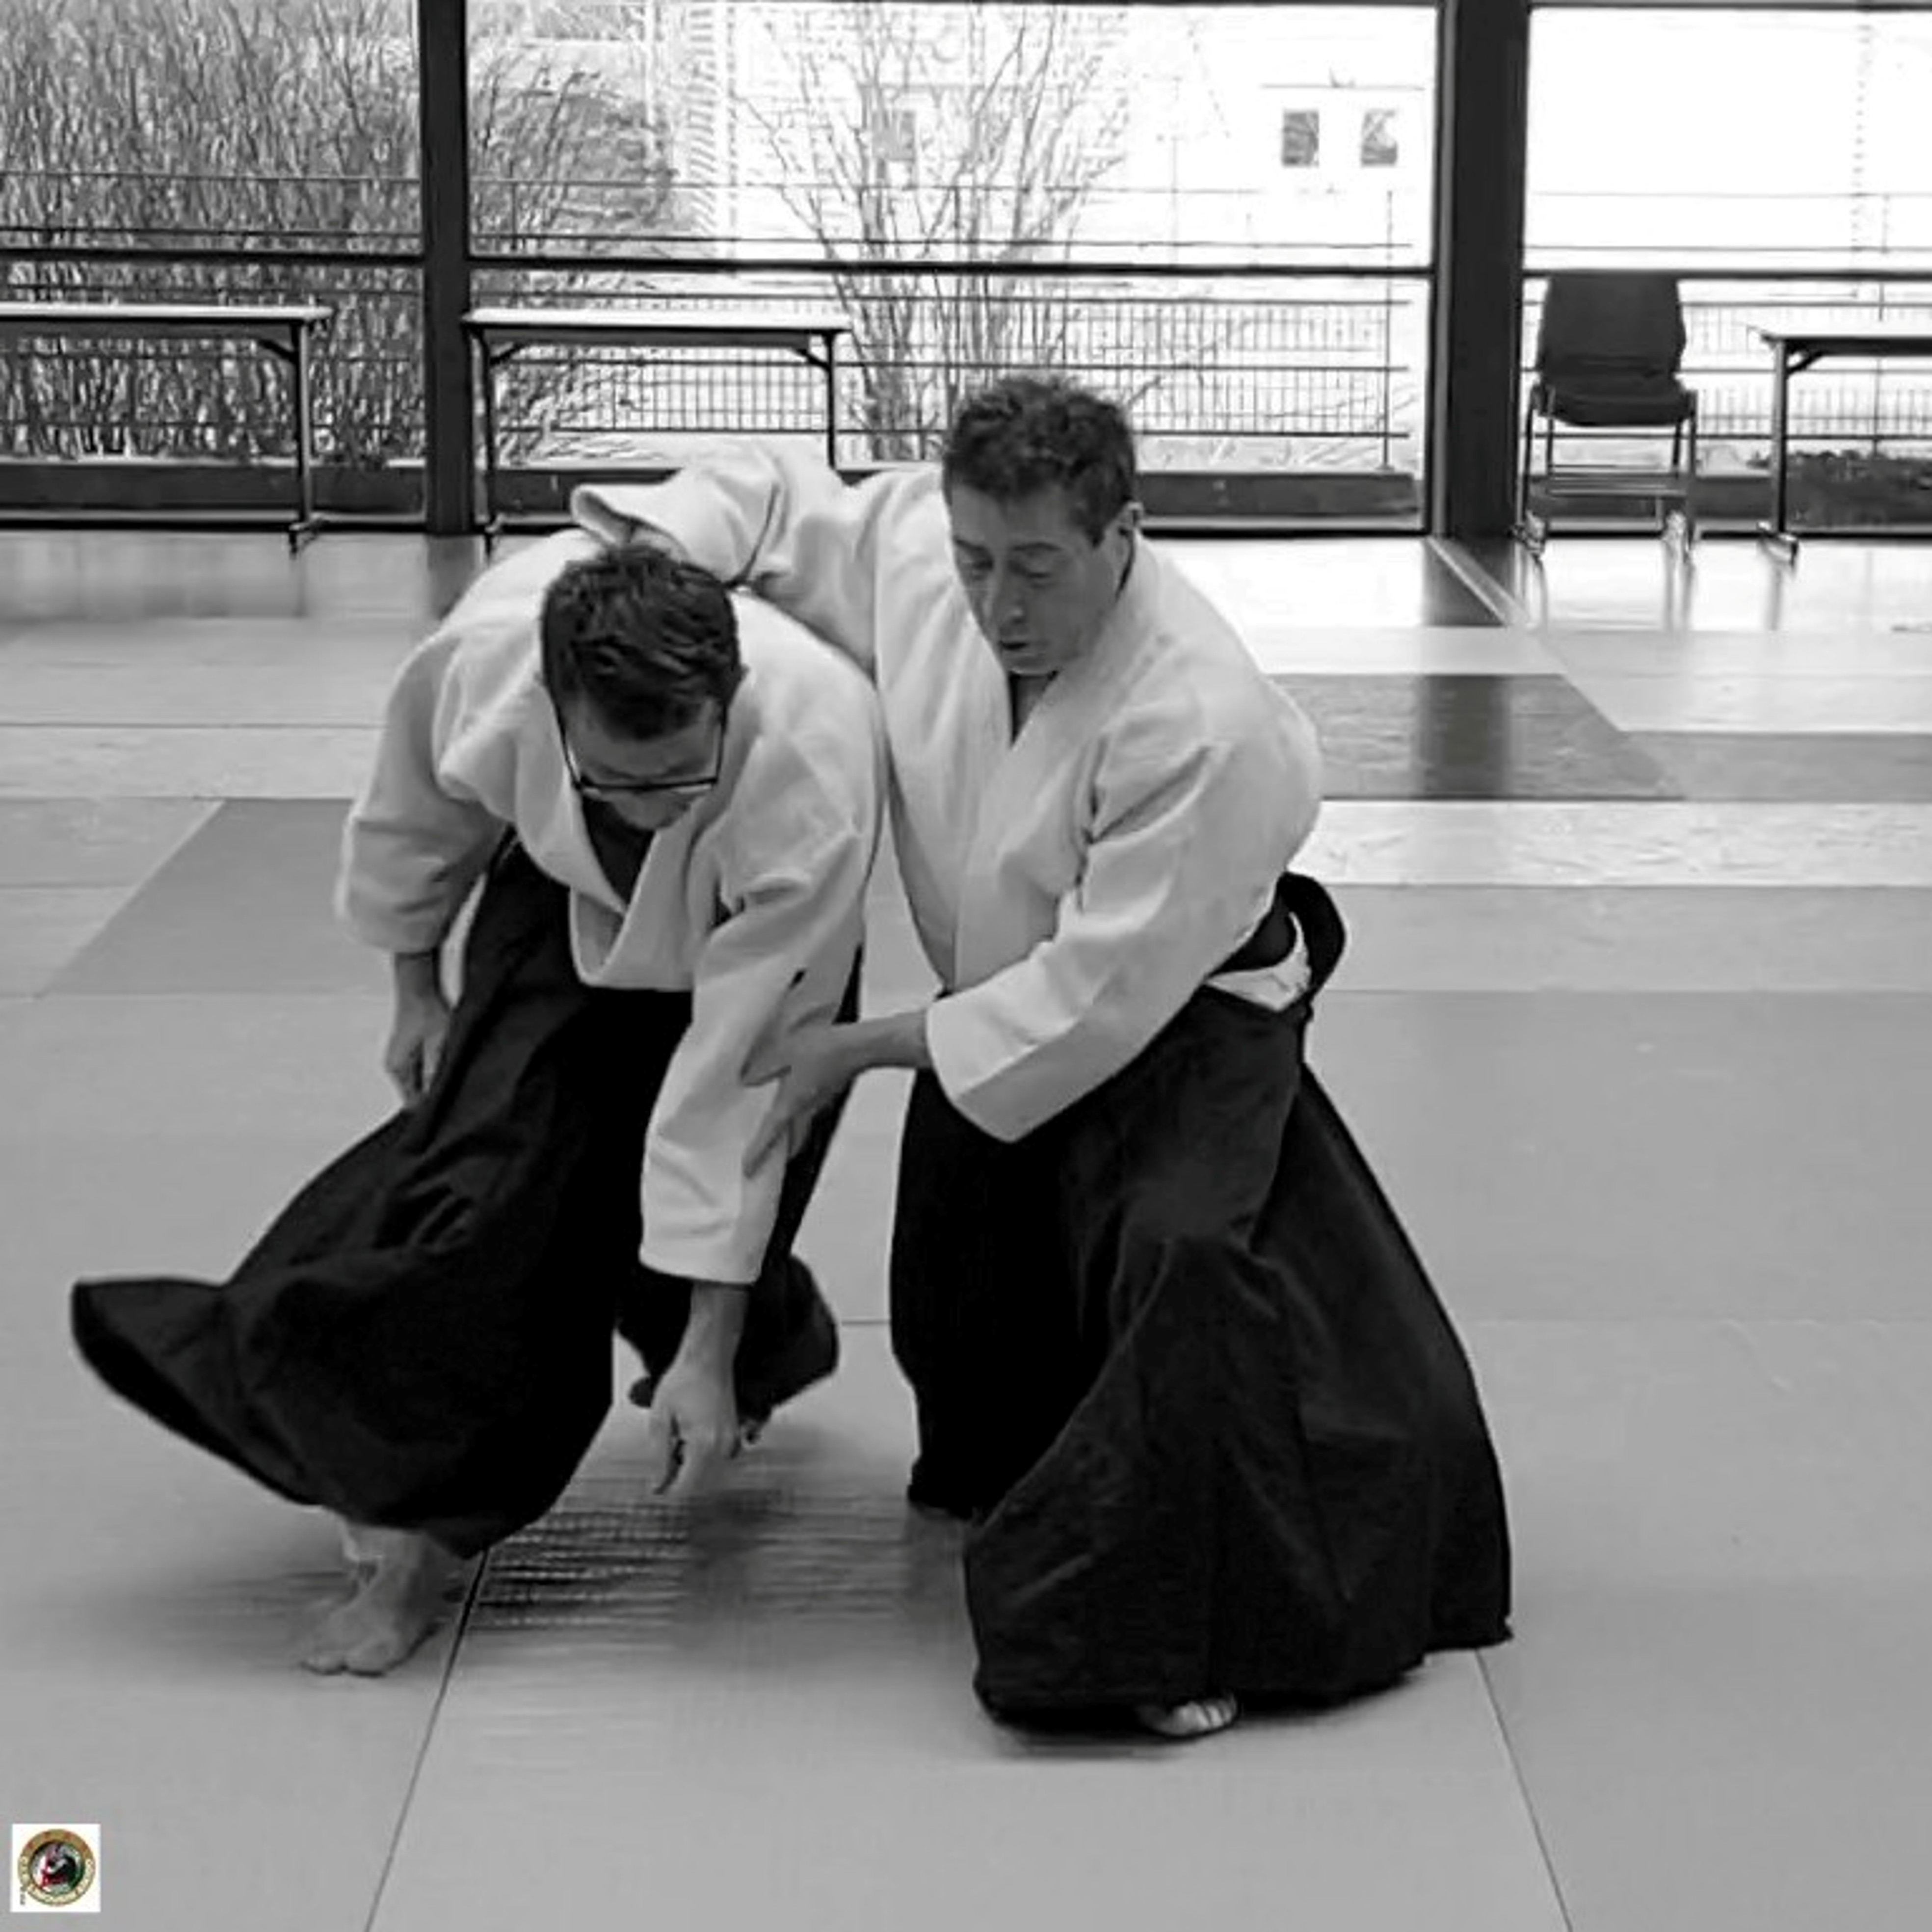 http://www.aikidoisle.fr/images/tele/CR_Stages/20200307_161308